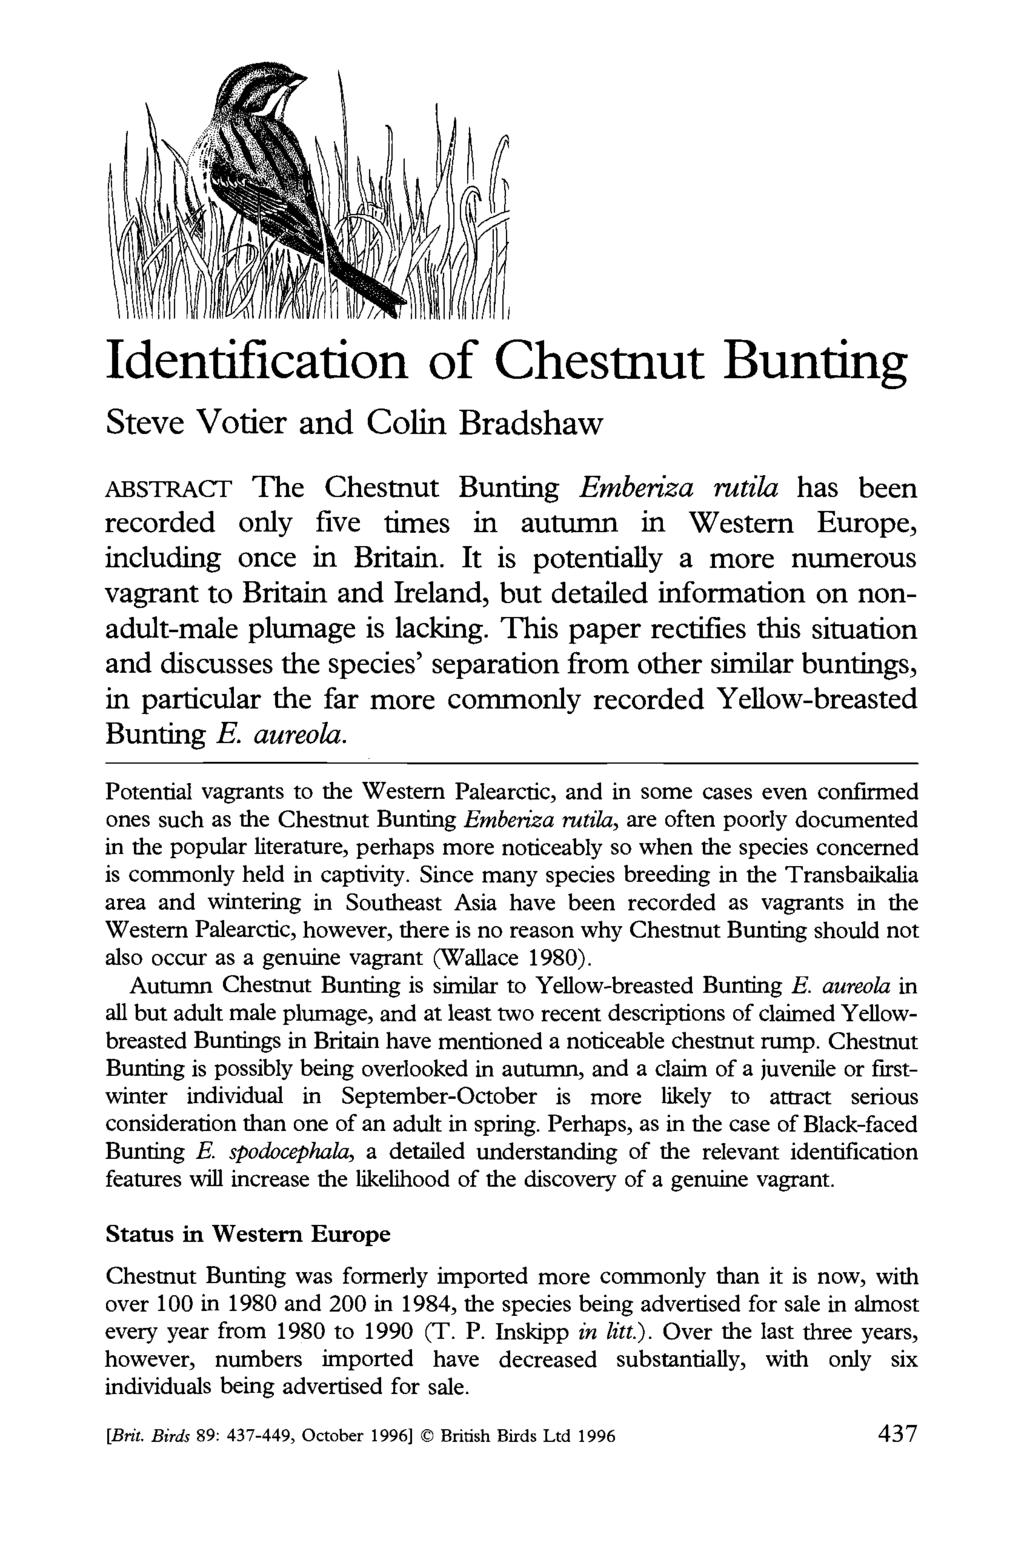 Identification of Chestnut Bunting Steve Votier and Colin Bradshaw ABSTRACT The Chestnut Bunting Emberiza rutila has been recorded only five times in autumn in Western Europe, including once in